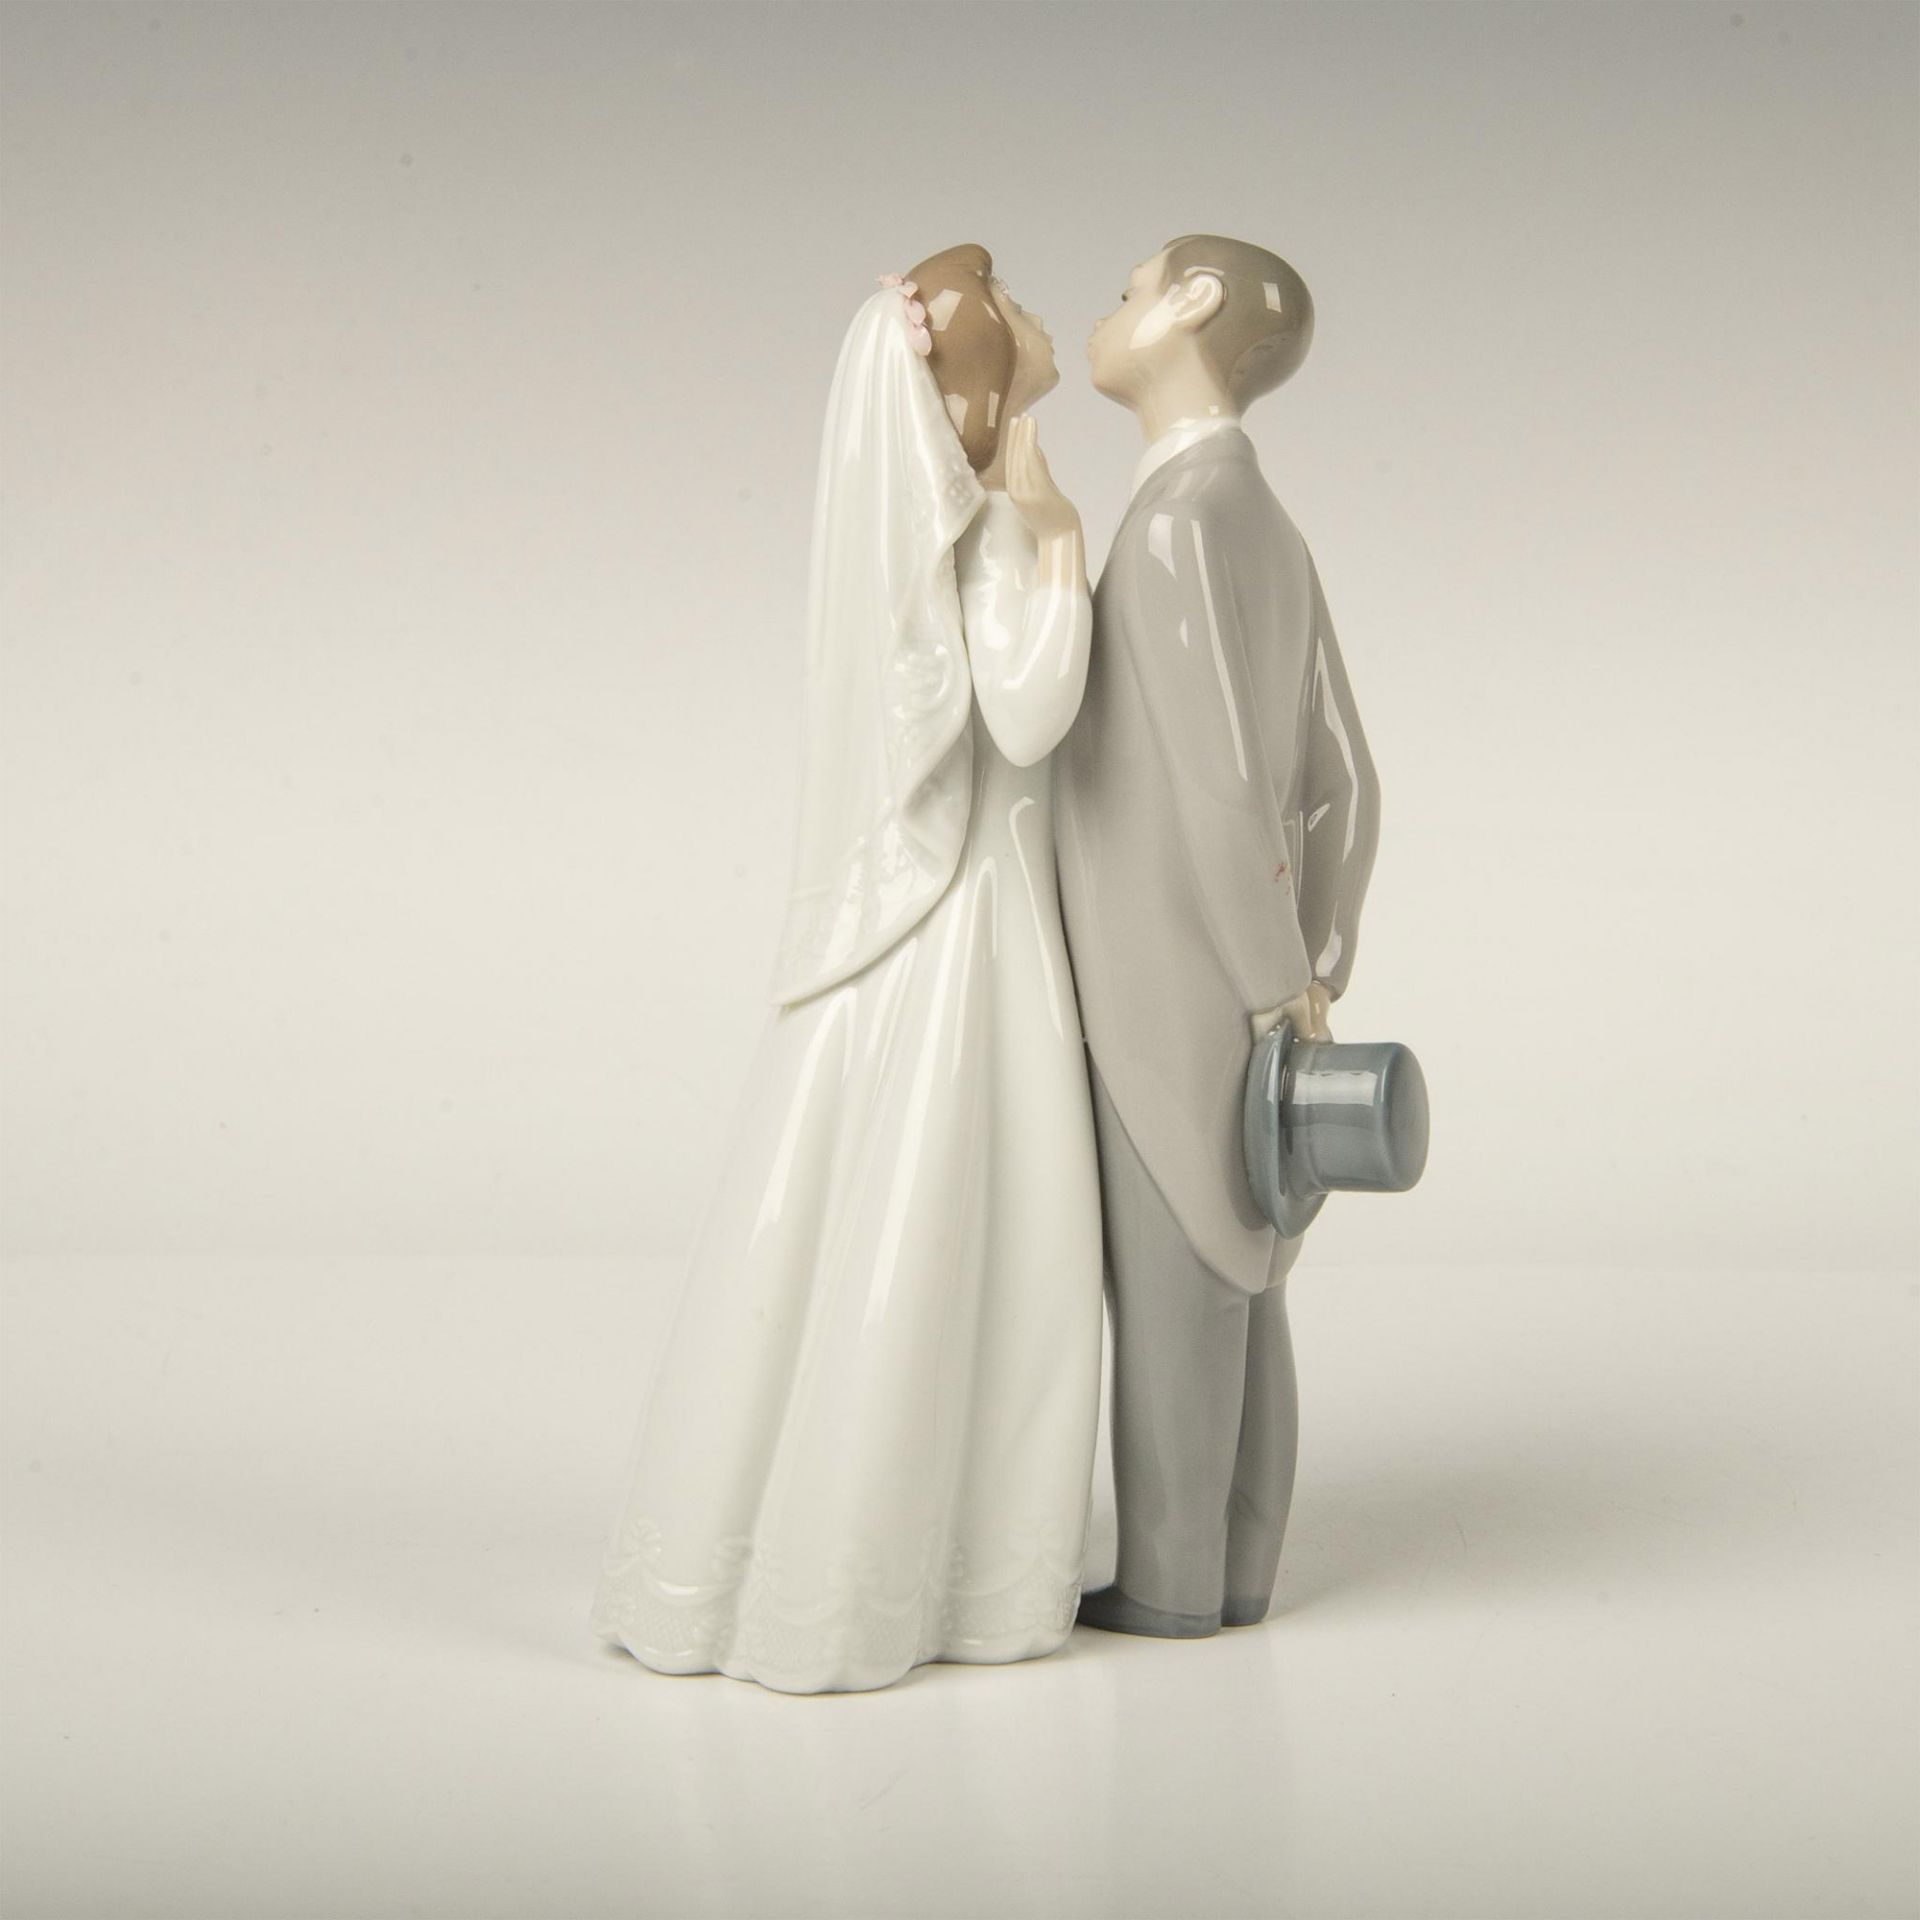 Lladro Porcelain Figurine, A Kiss to Remember 1006620 - Image 2 of 4